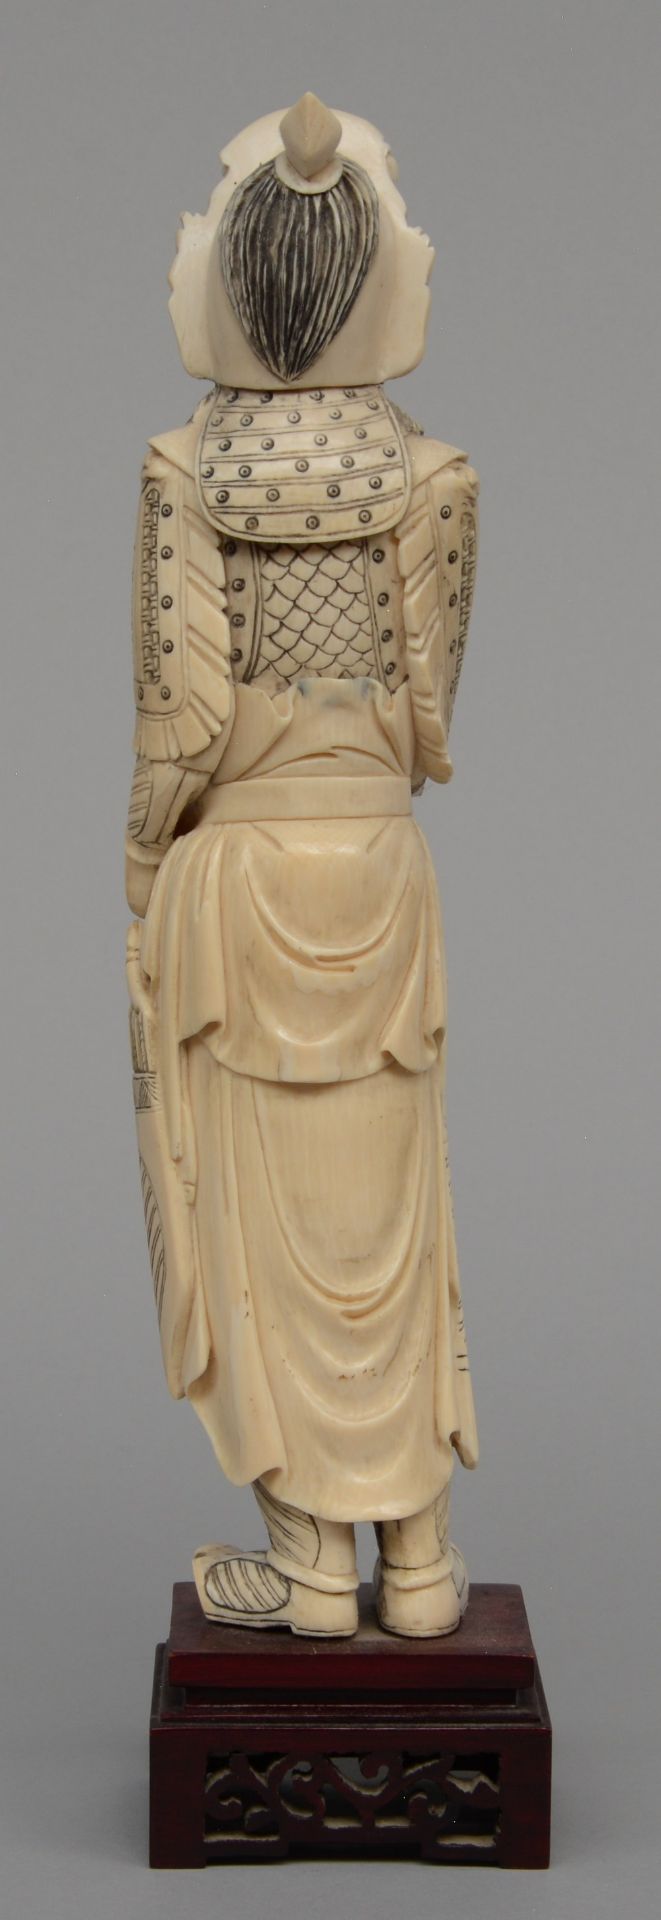 A Chinese ivory carved warrior on a wooden base, ca. 1900, H 35 cm - Image 3 of 6